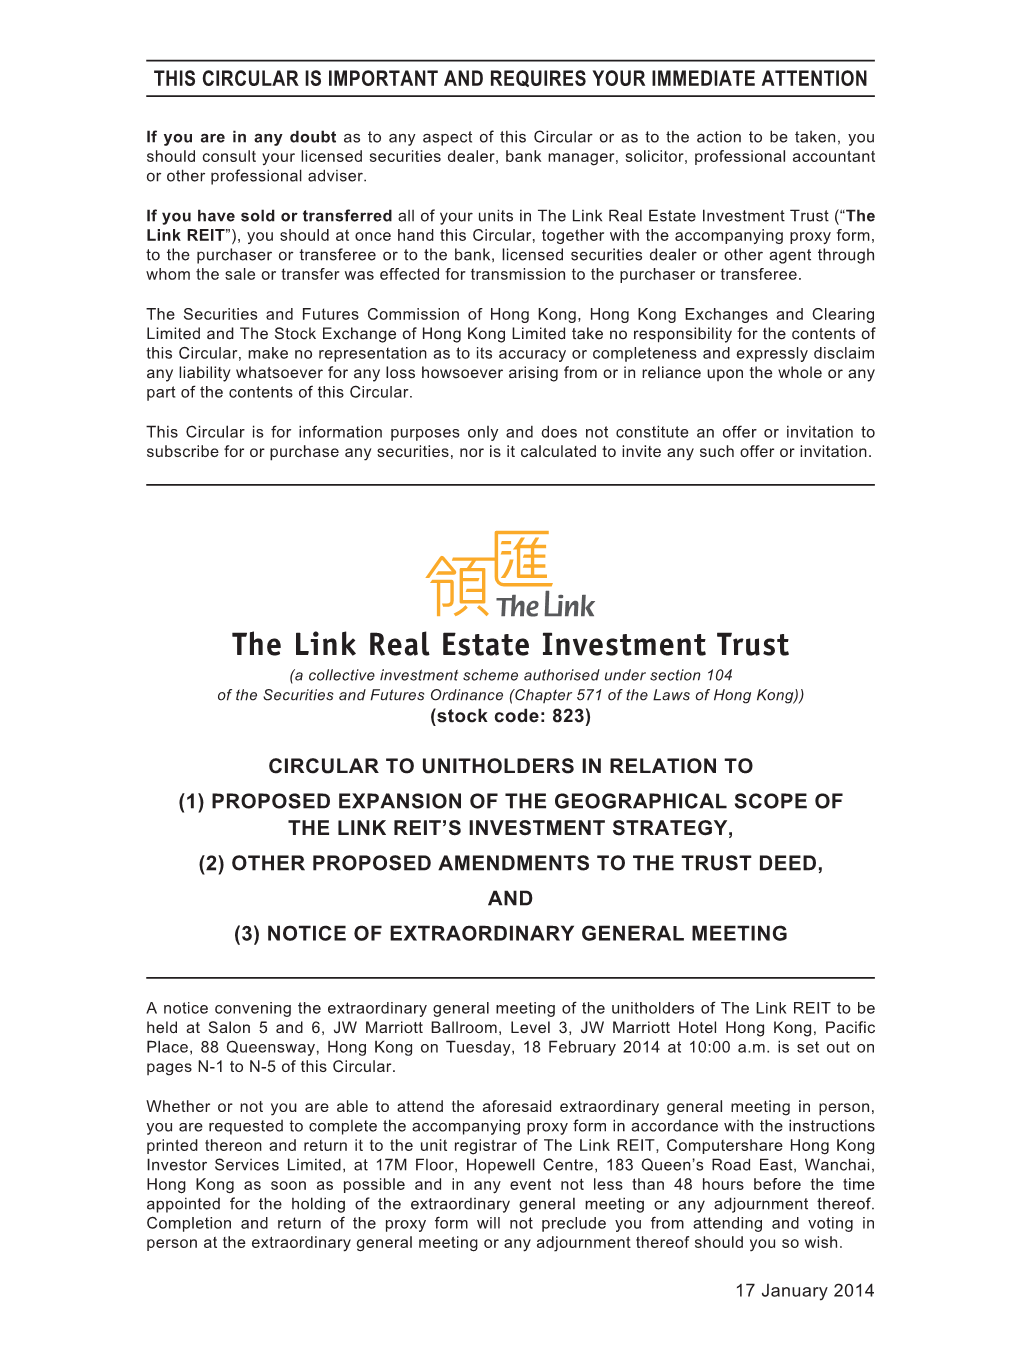 The Link Real Estate Investment Trust